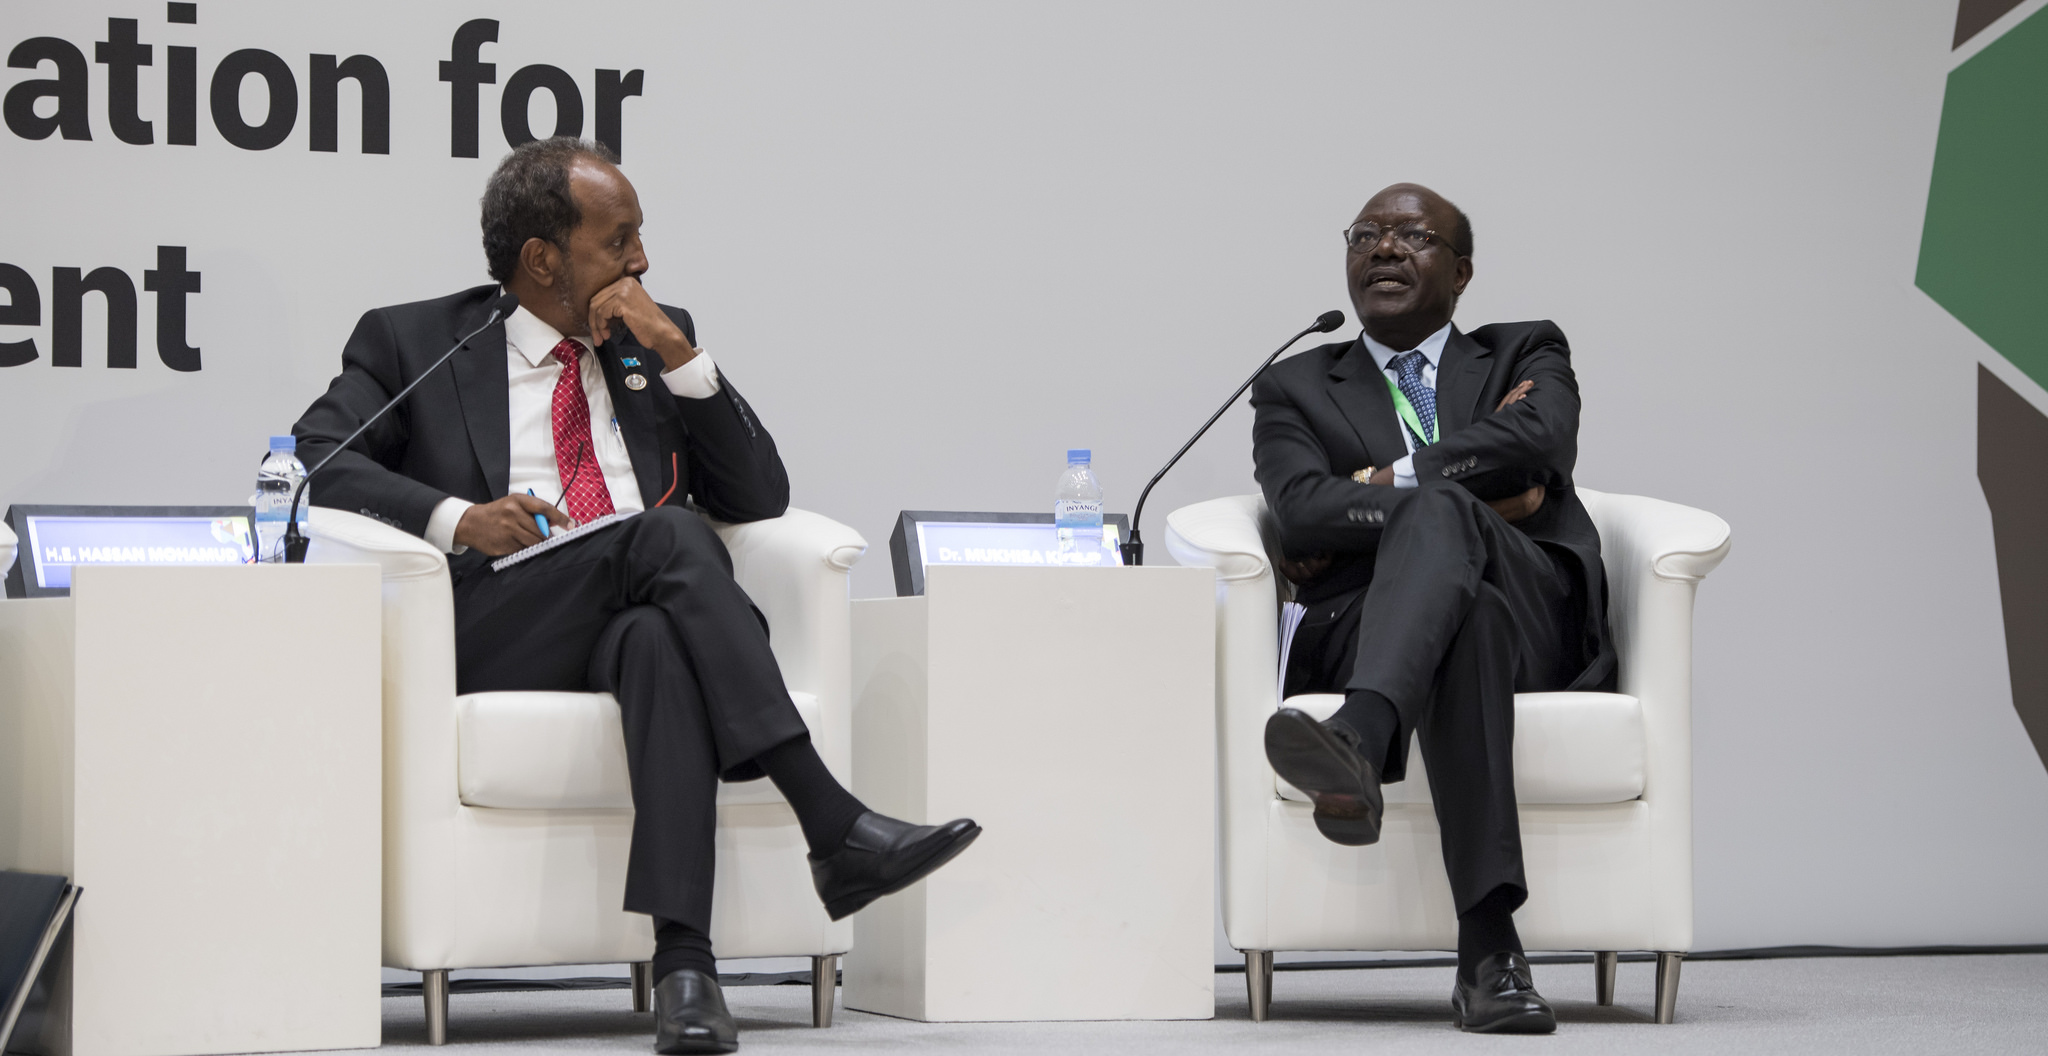 Dr Mukhisa Kituyi, the Secretary-General of the United Nations Conference on Trade and Development, makes a point as former Somali president Hassan Sheikh Mohamud looks on during a panel discussion at Kigali Convention Centre yesterday. Village Urugwiro.